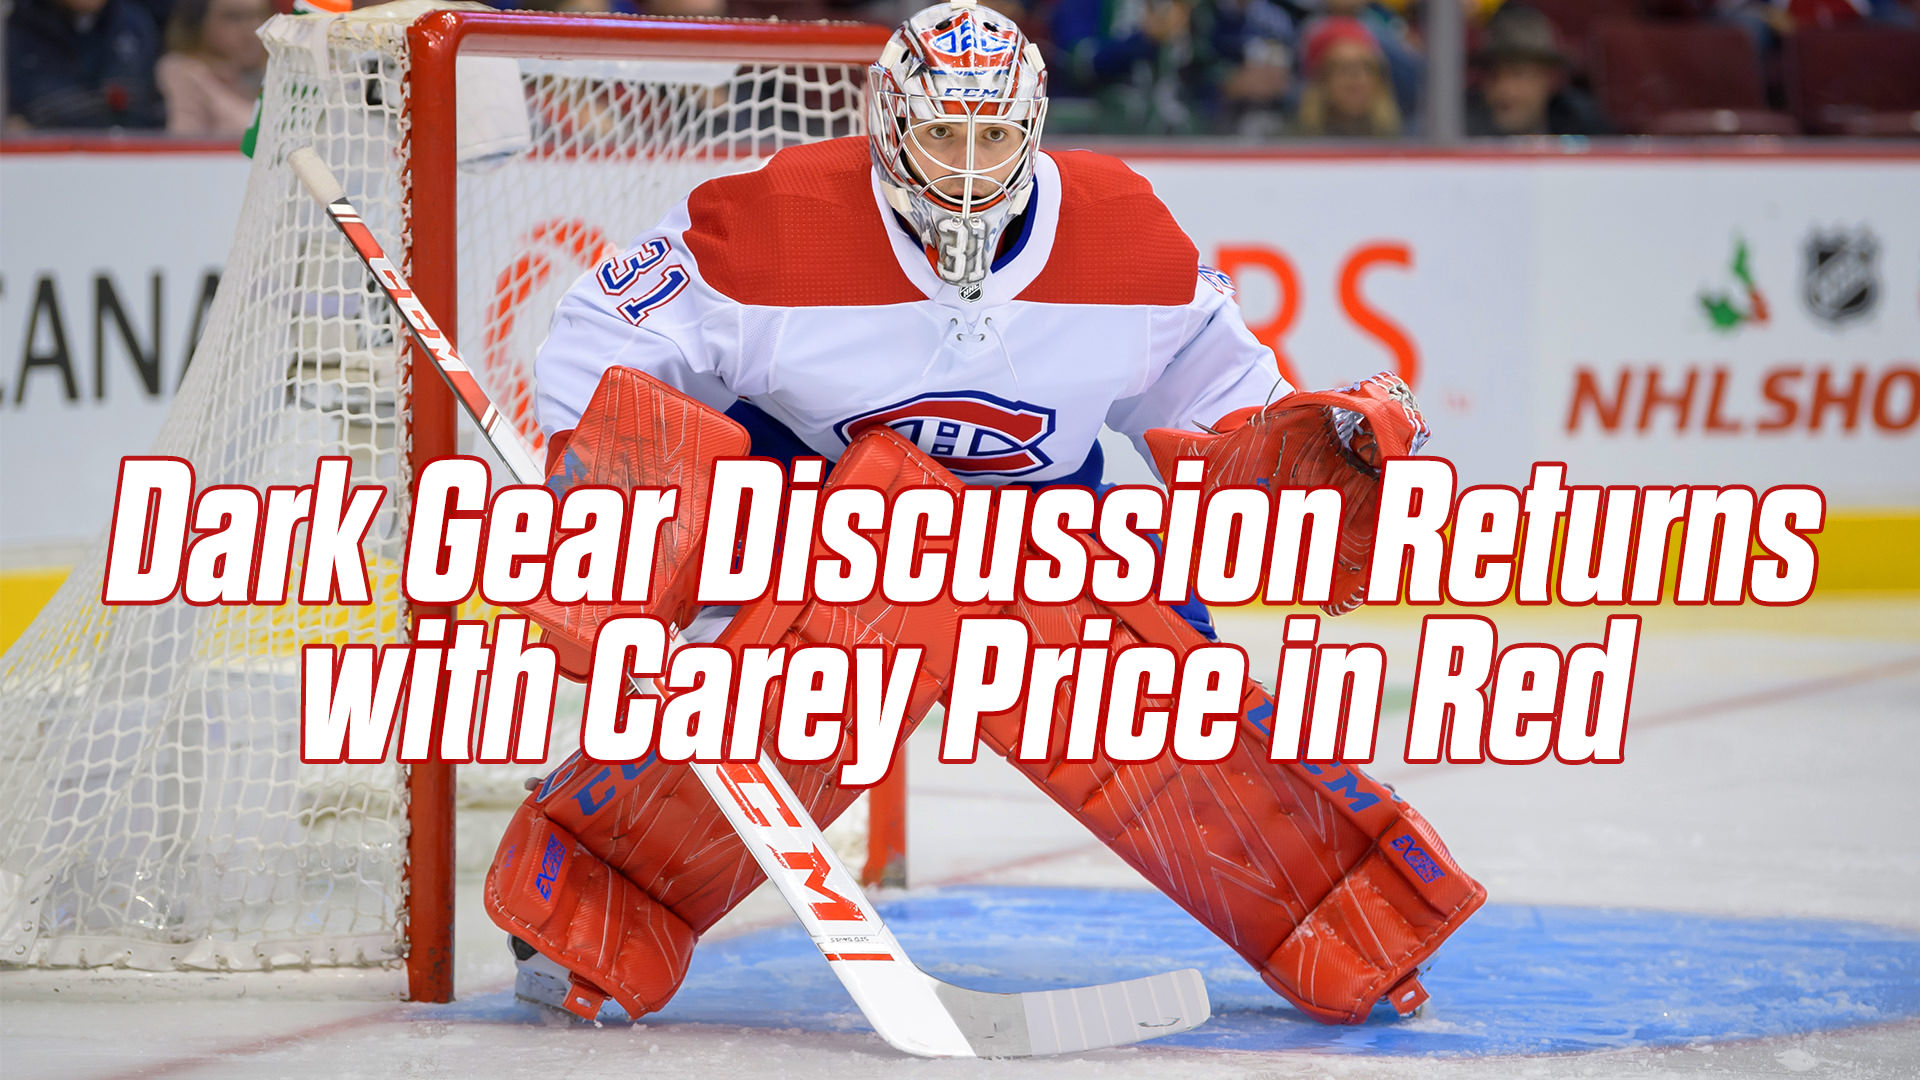 Dark Gear Discussion Returns with Carey Price in Red